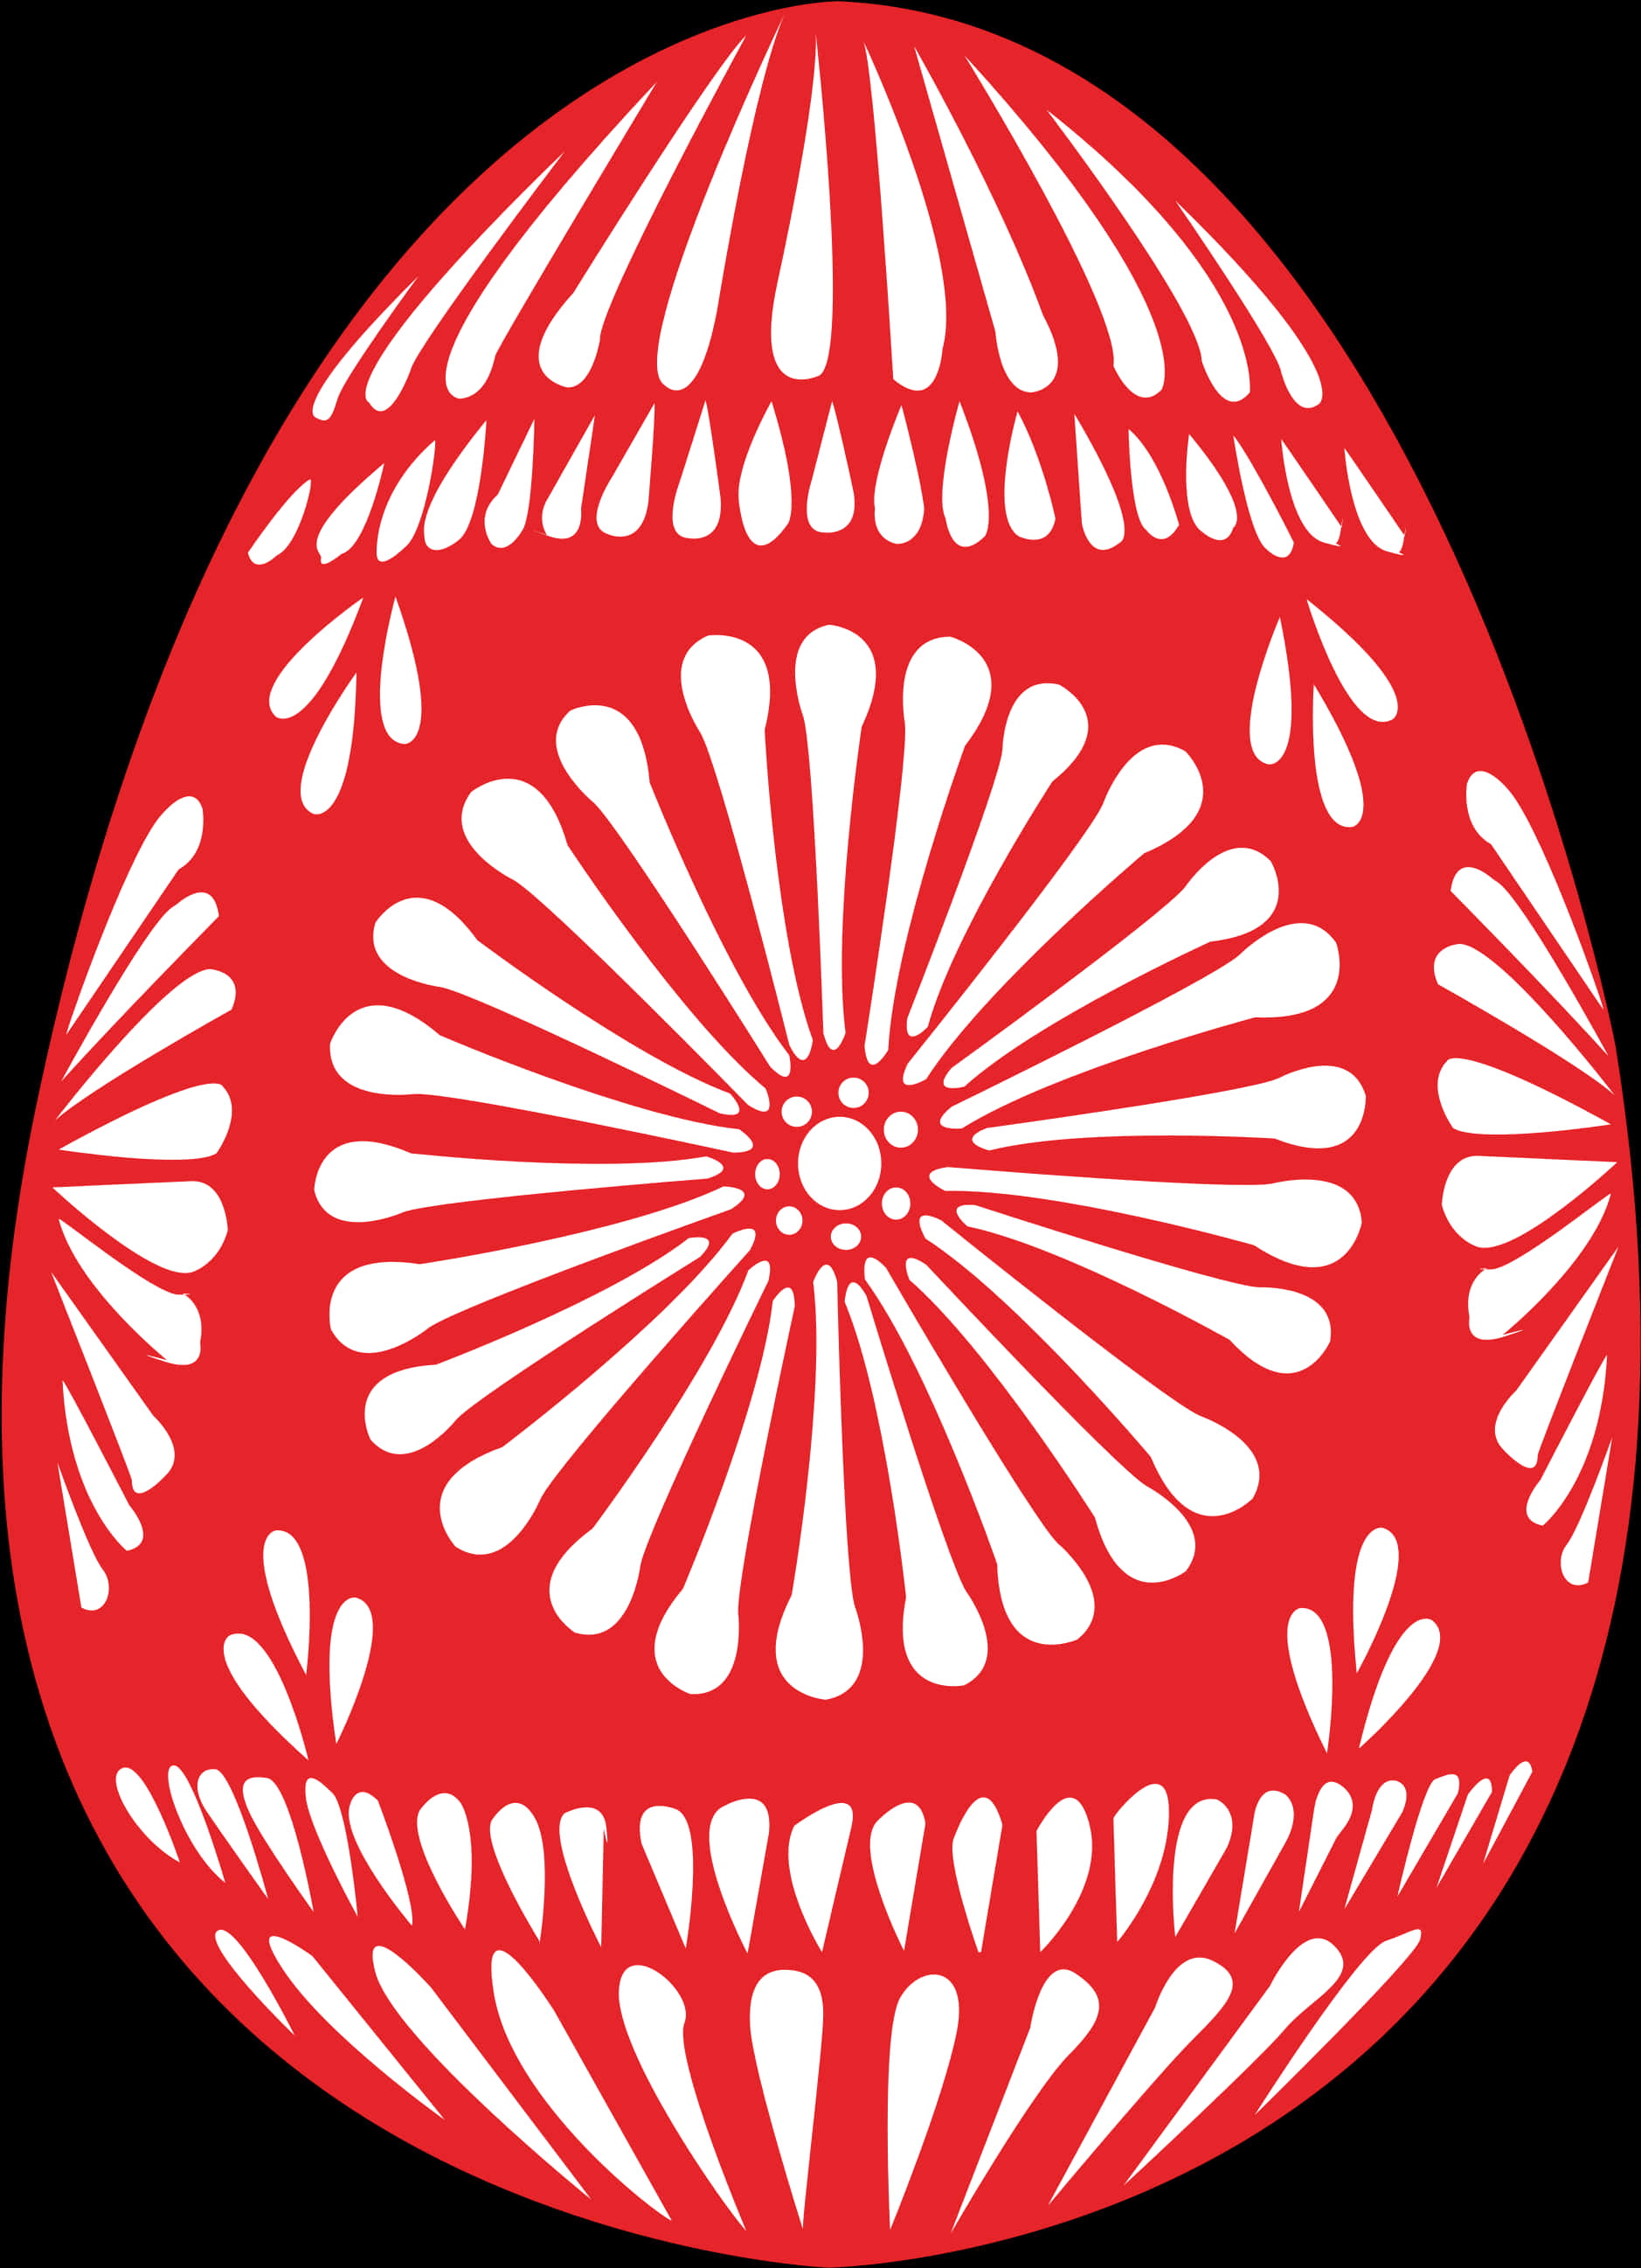 A Red And White Egg With White Design